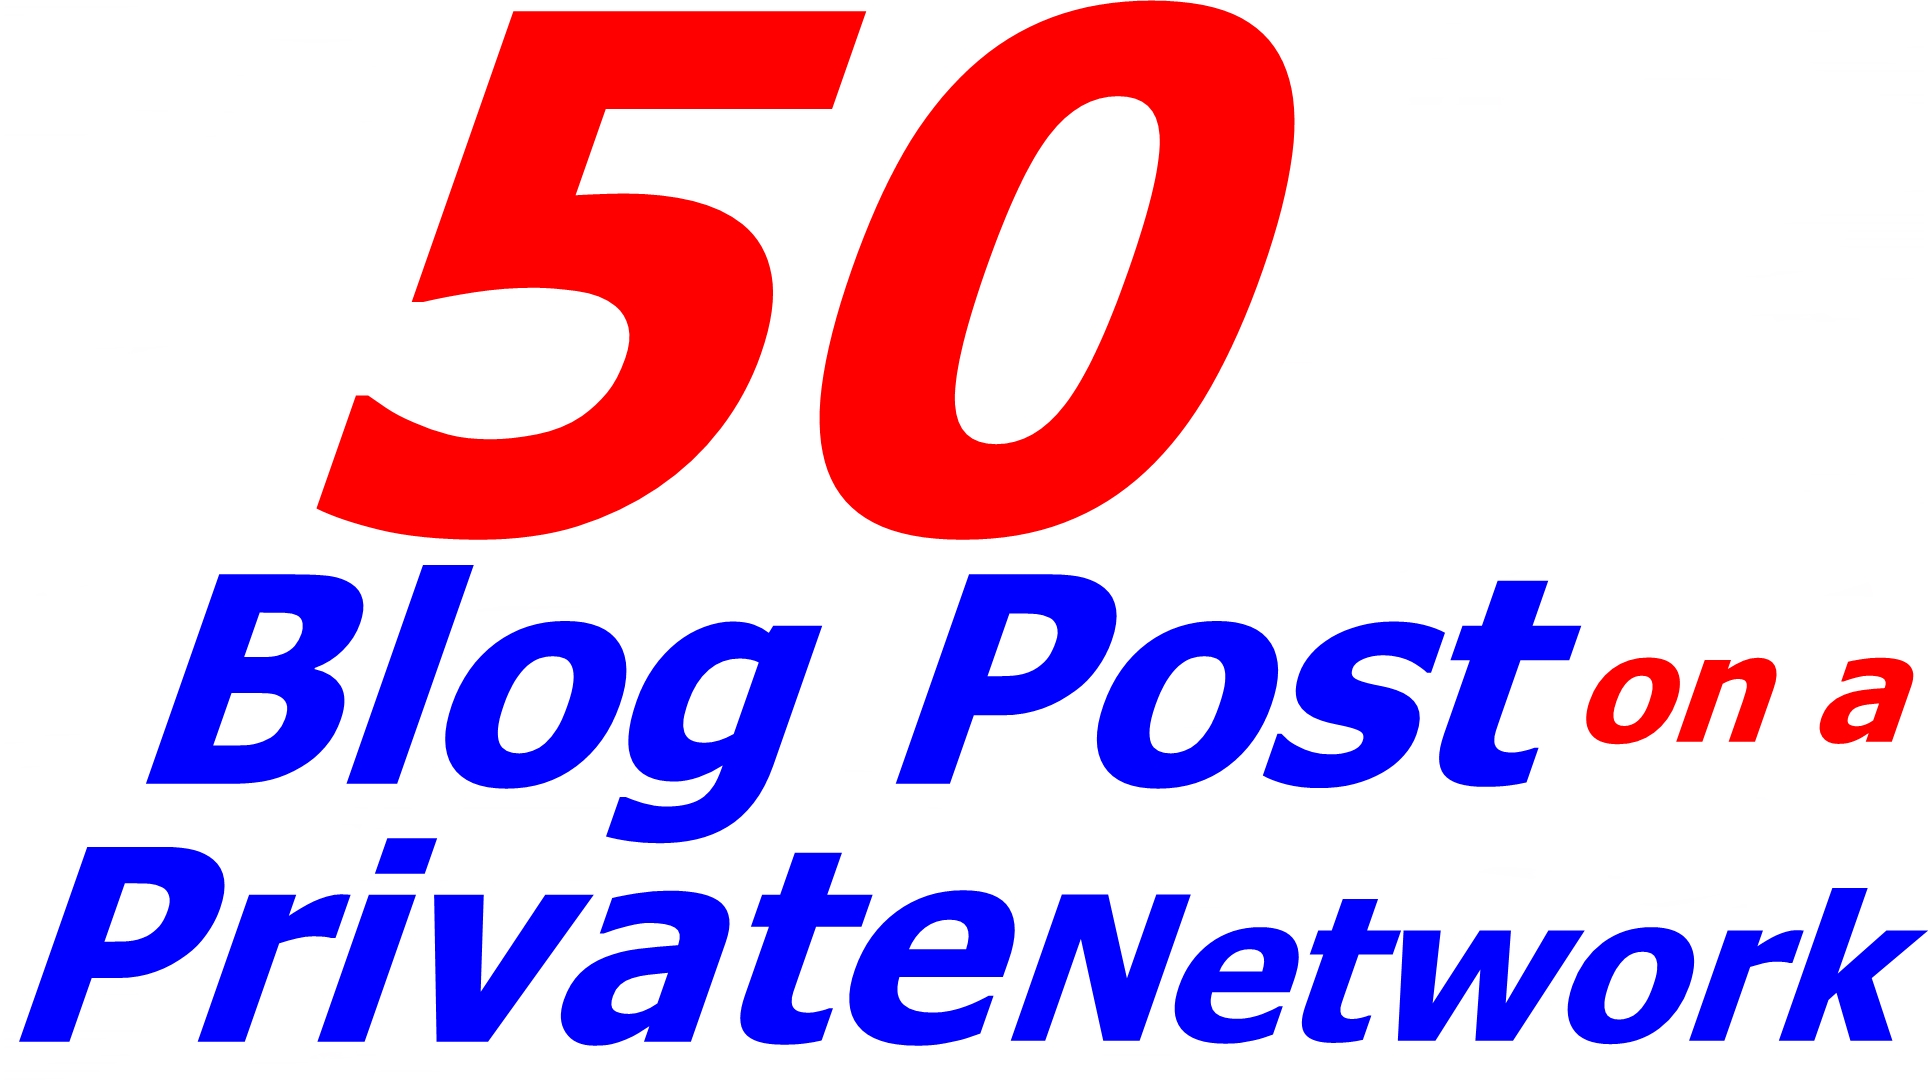 I will create 50 blog posts on a private blog network in 24 hours